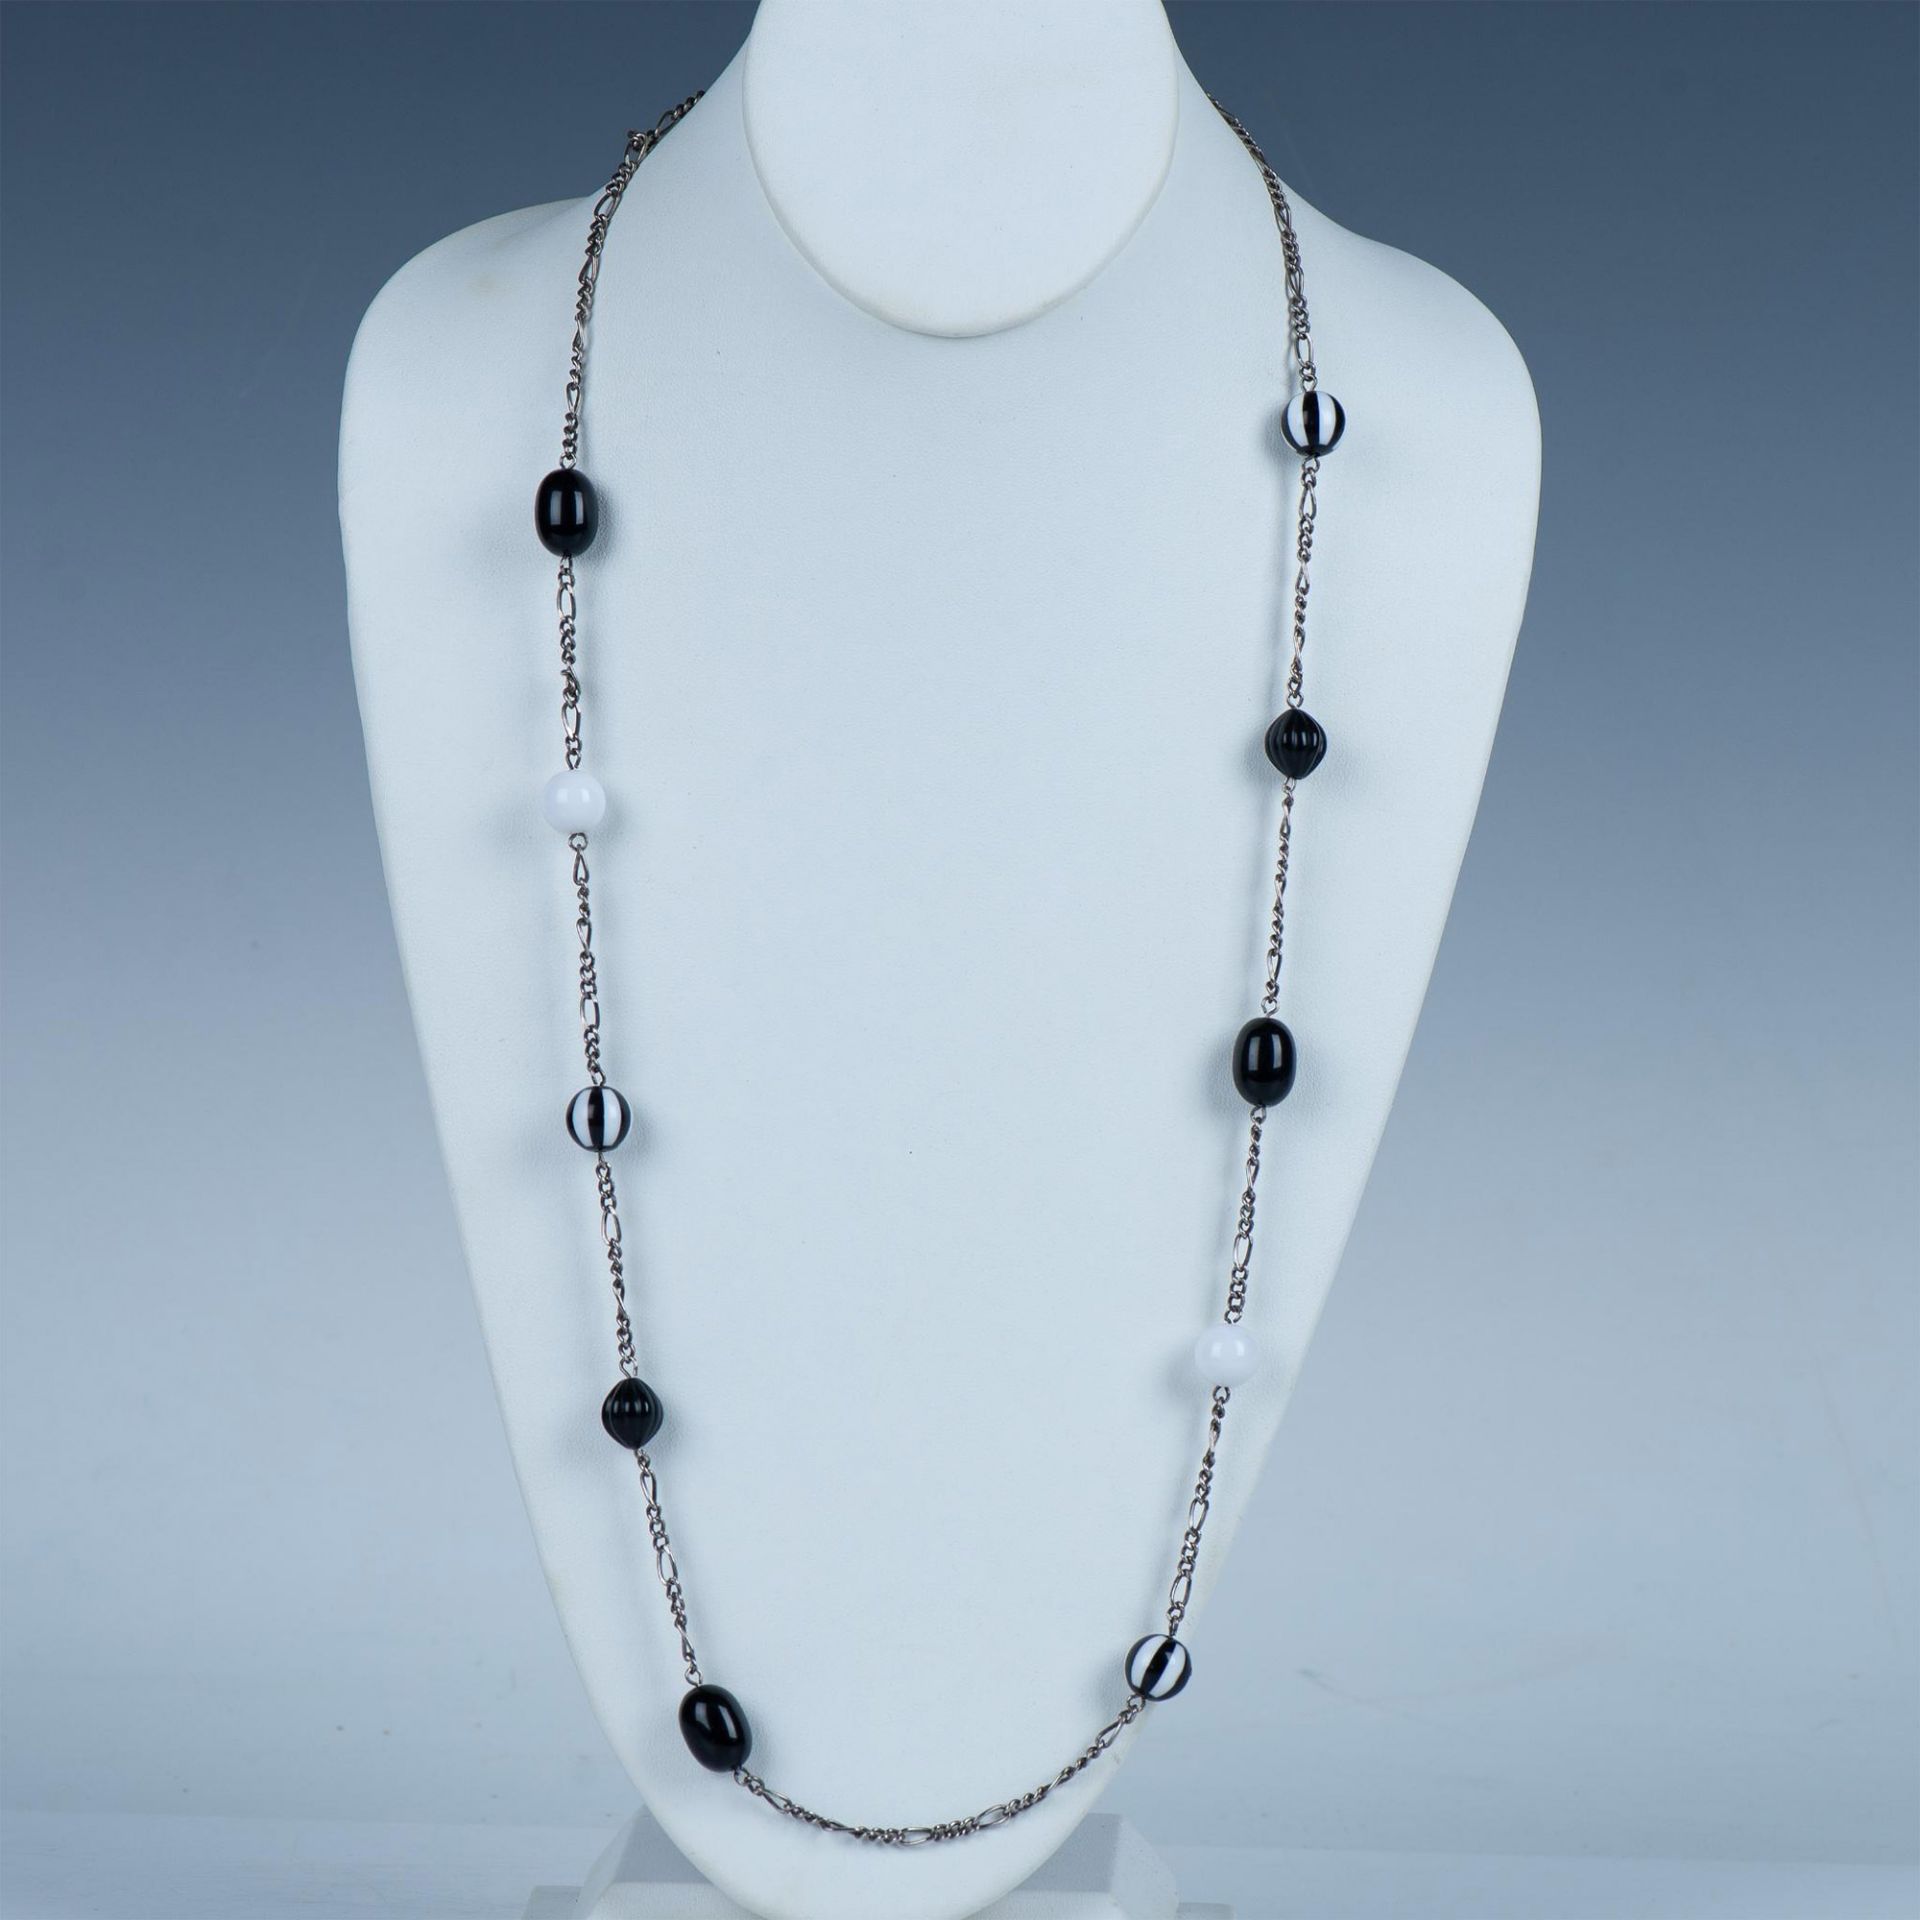 Cute Silver Metal Black & White Beads Necklace